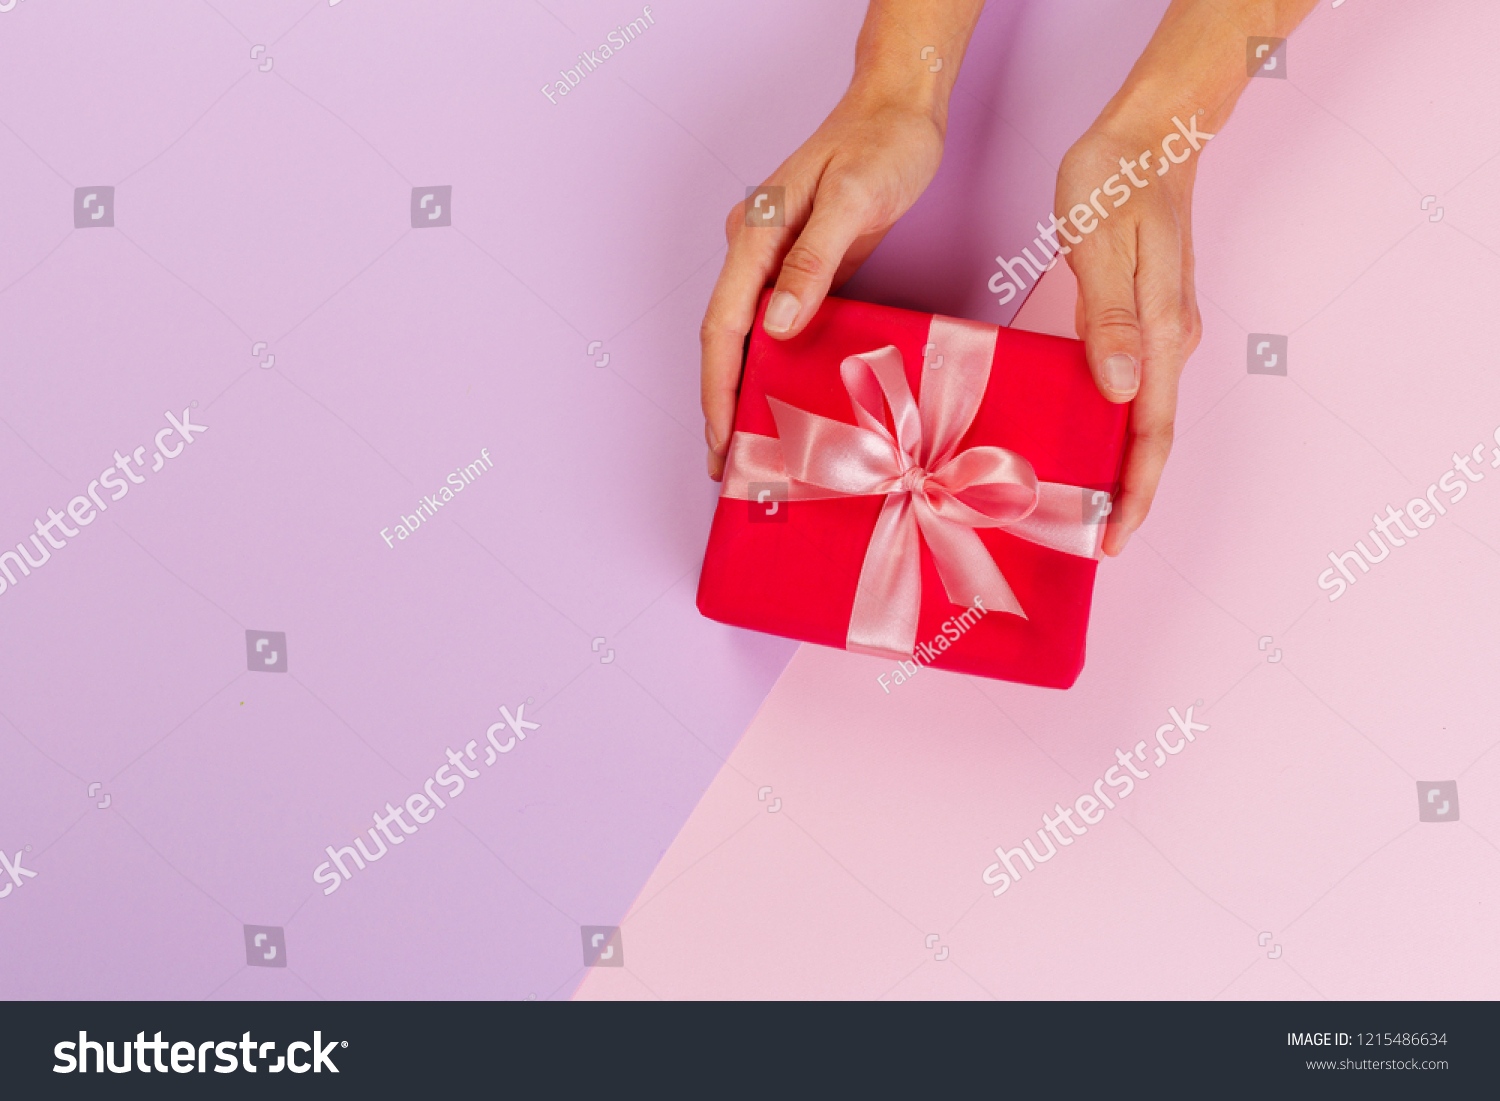 Woman holding gift box on color background #1215486634